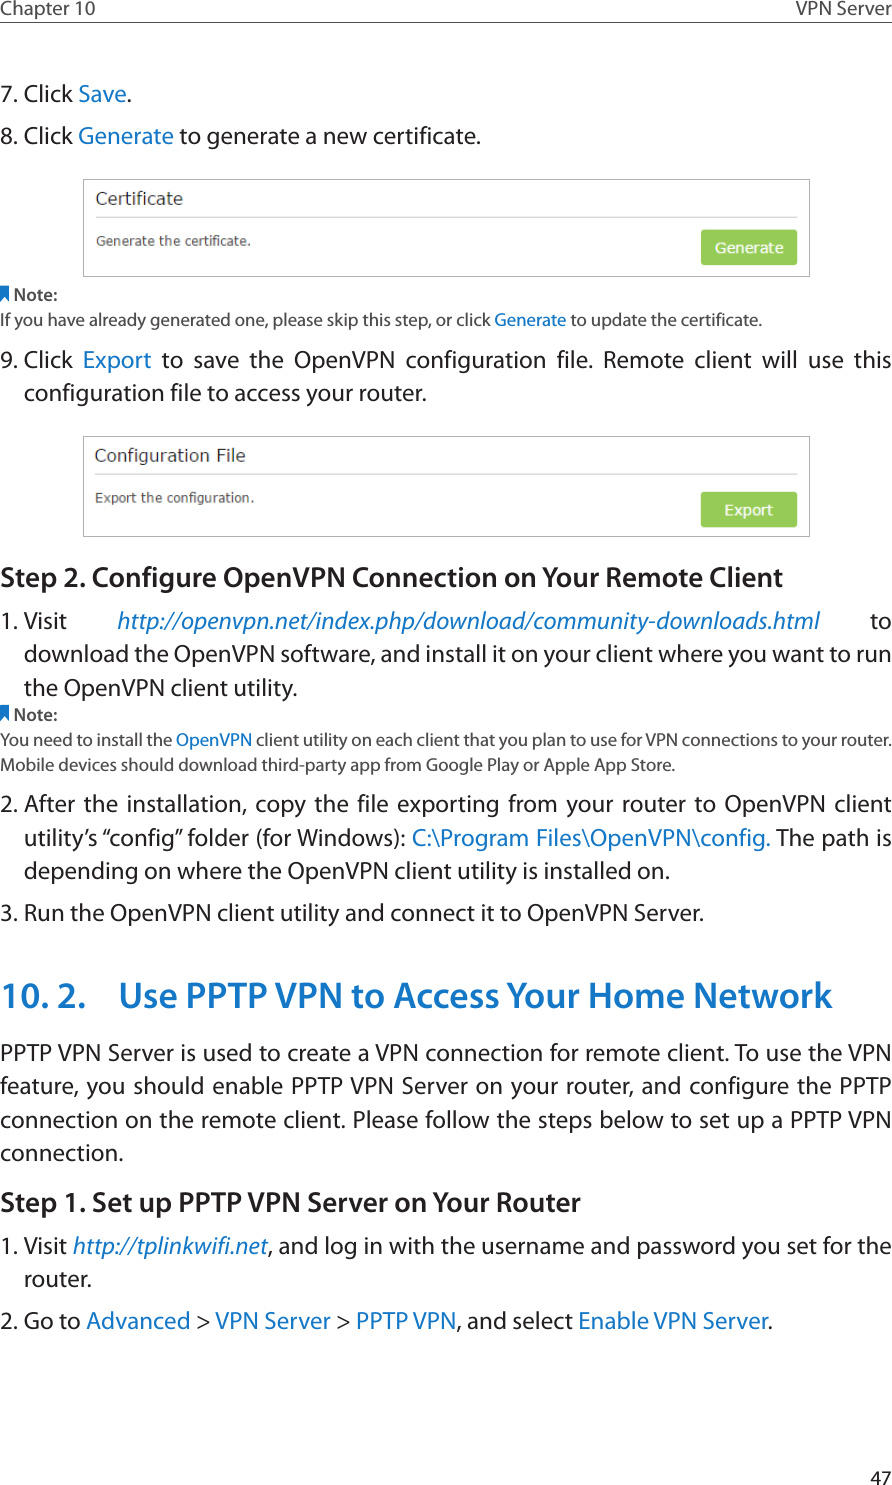 47Chapter 10 VPN Server7. Click Save.8. Click Generate to generate a new certificate. Note:If you have already generated one, please skip this step, or click Generate to update the certificate.9. Click  Export to save the OpenVPN configuration file. Remote client will use this configuration file to access your router.Step 2. Configure OpenVPN Connection on Your Remote Client1. Visit  http://openvpn.net/index.php/download/community-downloads.html to download the OpenVPN software, and install it on your client where you want to run the OpenVPN client utility.Note:You need to install the OpenVPN client utility on each client that you plan to use for VPN connections to your router. Mobile devices should download third-party app from Google Play or Apple App Store.2. After the installation, copy the file exporting from your router to OpenVPN client utility’s “config” folder (for Windows): C:\Program Files\OpenVPN\config. The path is depending on where the OpenVPN client utility is installed on.3. Run the OpenVPN client utility and connect it to OpenVPN Server.10. 2.  Use PPTP VPN to Access Your Home NetworkPPTP VPN Server is used to create a VPN connection for remote client. To use the VPN feature, you should enable PPTP VPN Server on your router, and configure the PPTP connection on the remote client. Please follow the steps below to set up a PPTP VPN connection.Step 1. Set up PPTP VPN Server on Your Router1. Visit http://tplinkwifi.net, and log in with the username and password you set for the router.2. Go to Advanced &gt; VPN Server &gt; PPTP VPN, and select Enable VPN Server.